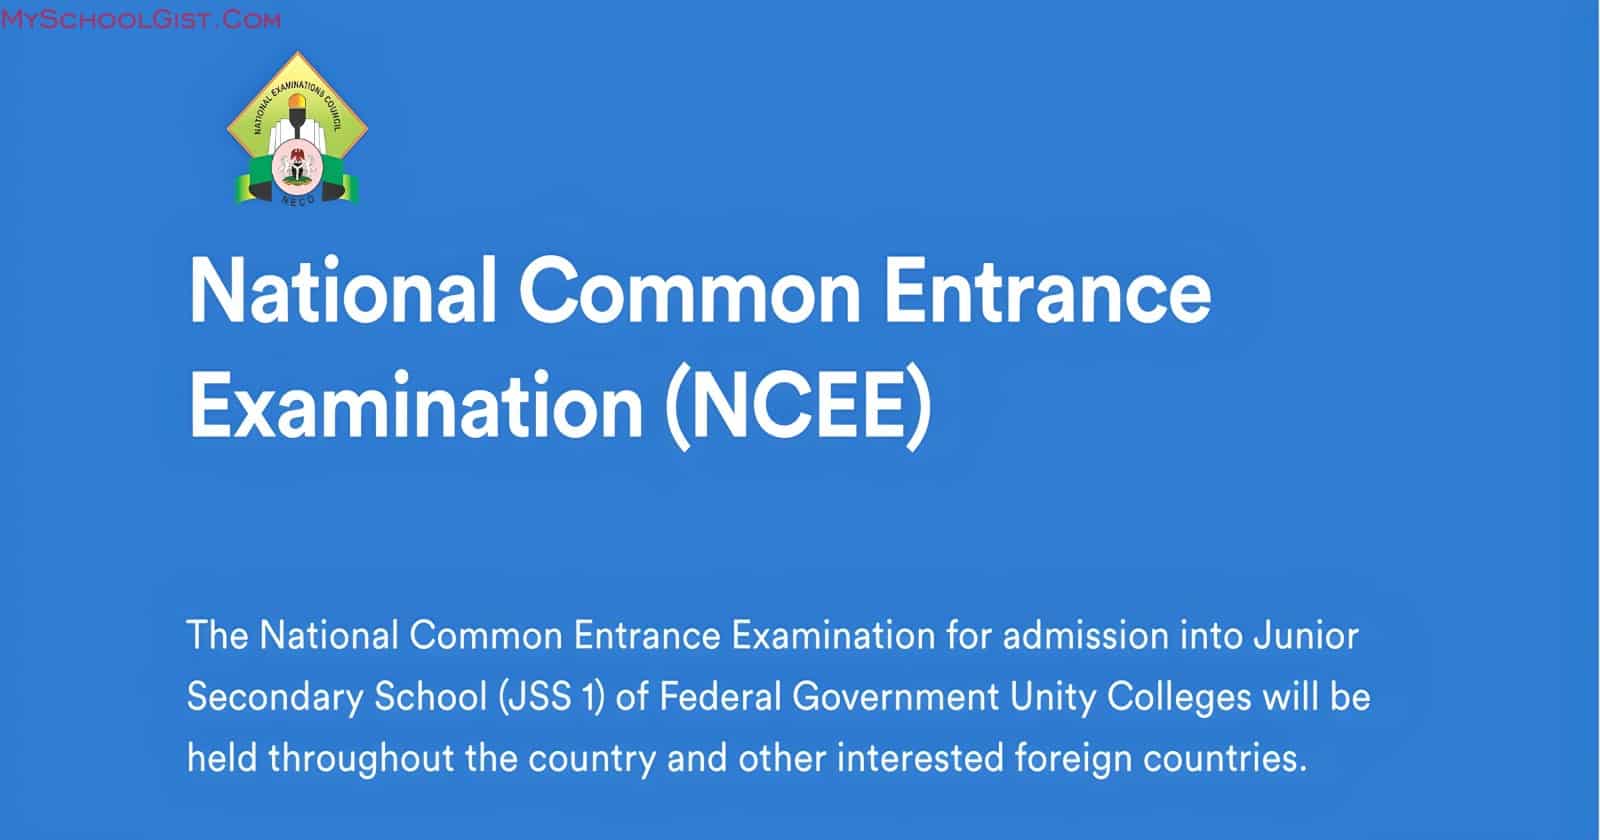 National Common Entrance Examination (NCEE) Registration